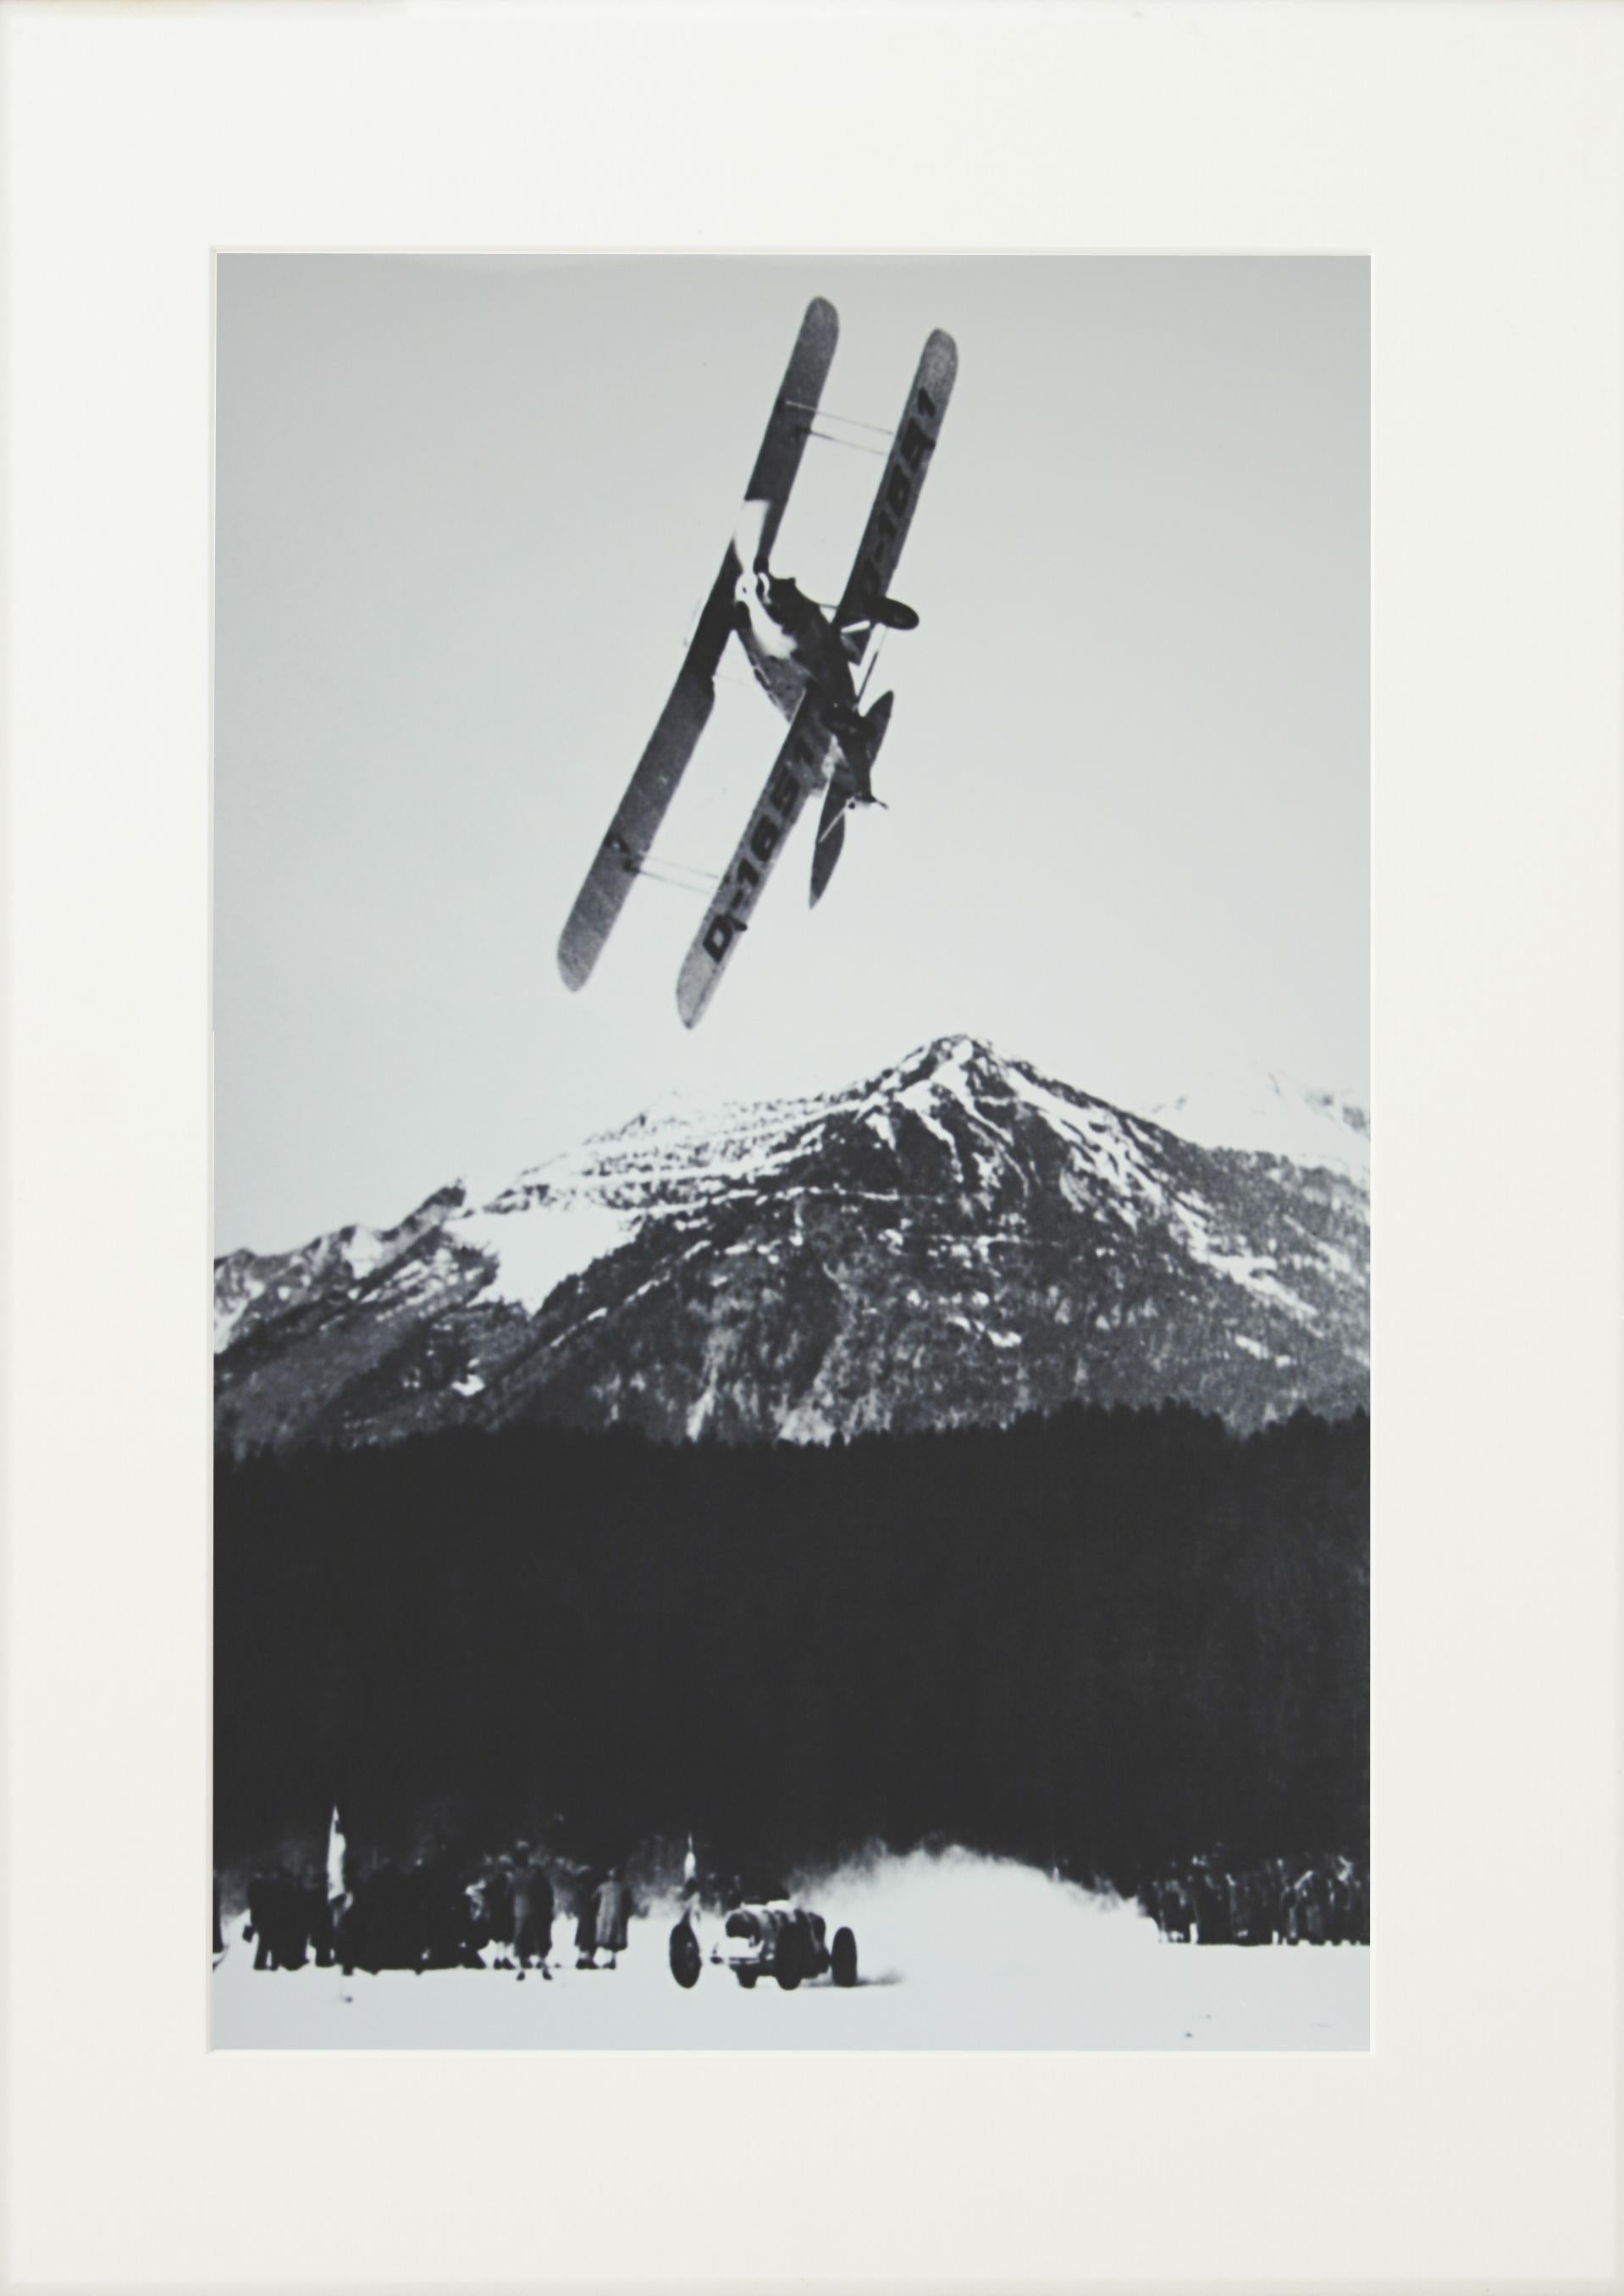 Sporting Art Alpine Ski Photograph, 'The Race' Taken from Original 1930s Photograph For Sale